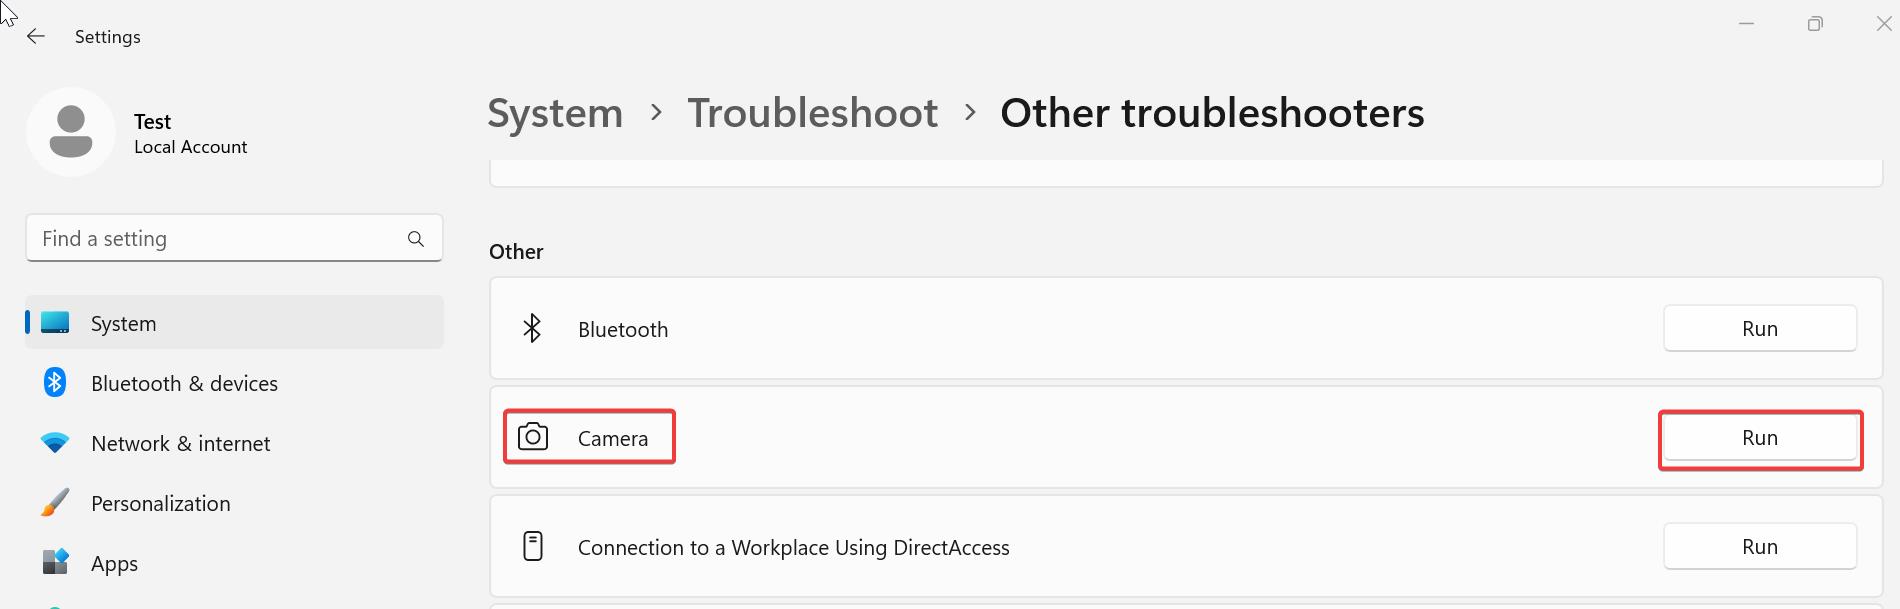 Run camera troubleshooter-Can’t start your camera error